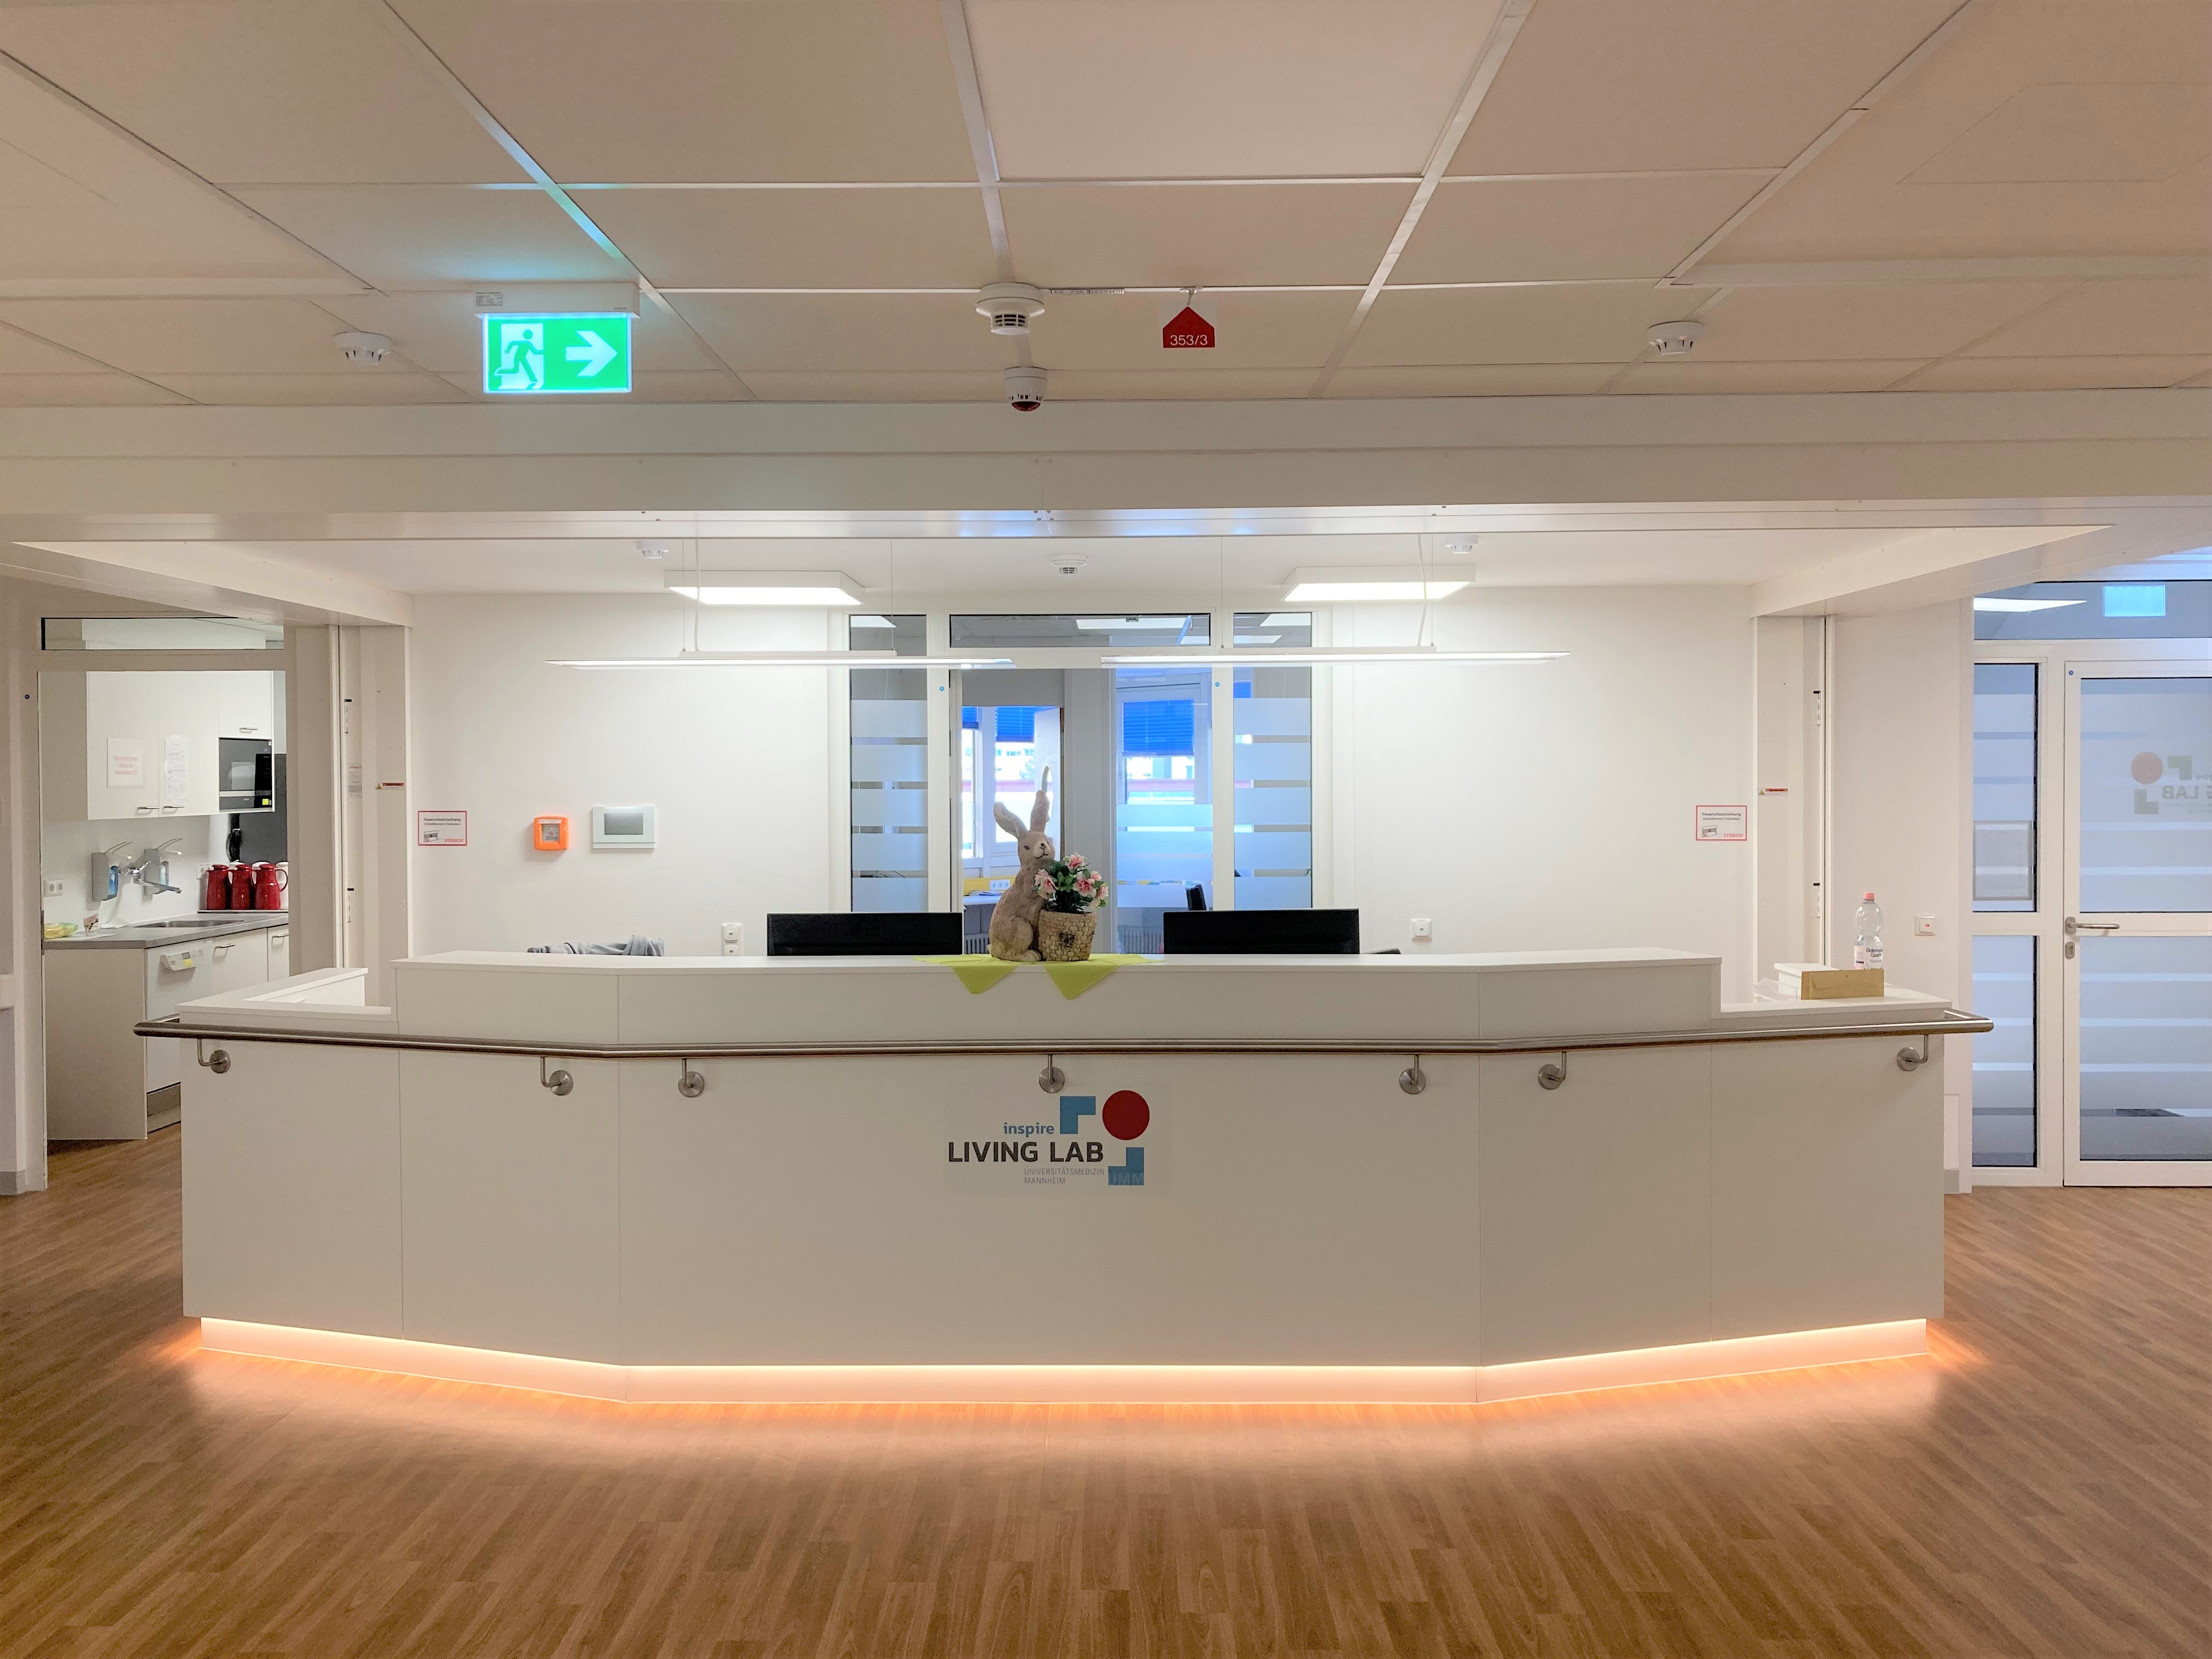 The photo shows a white reception desk in a hospital ward.